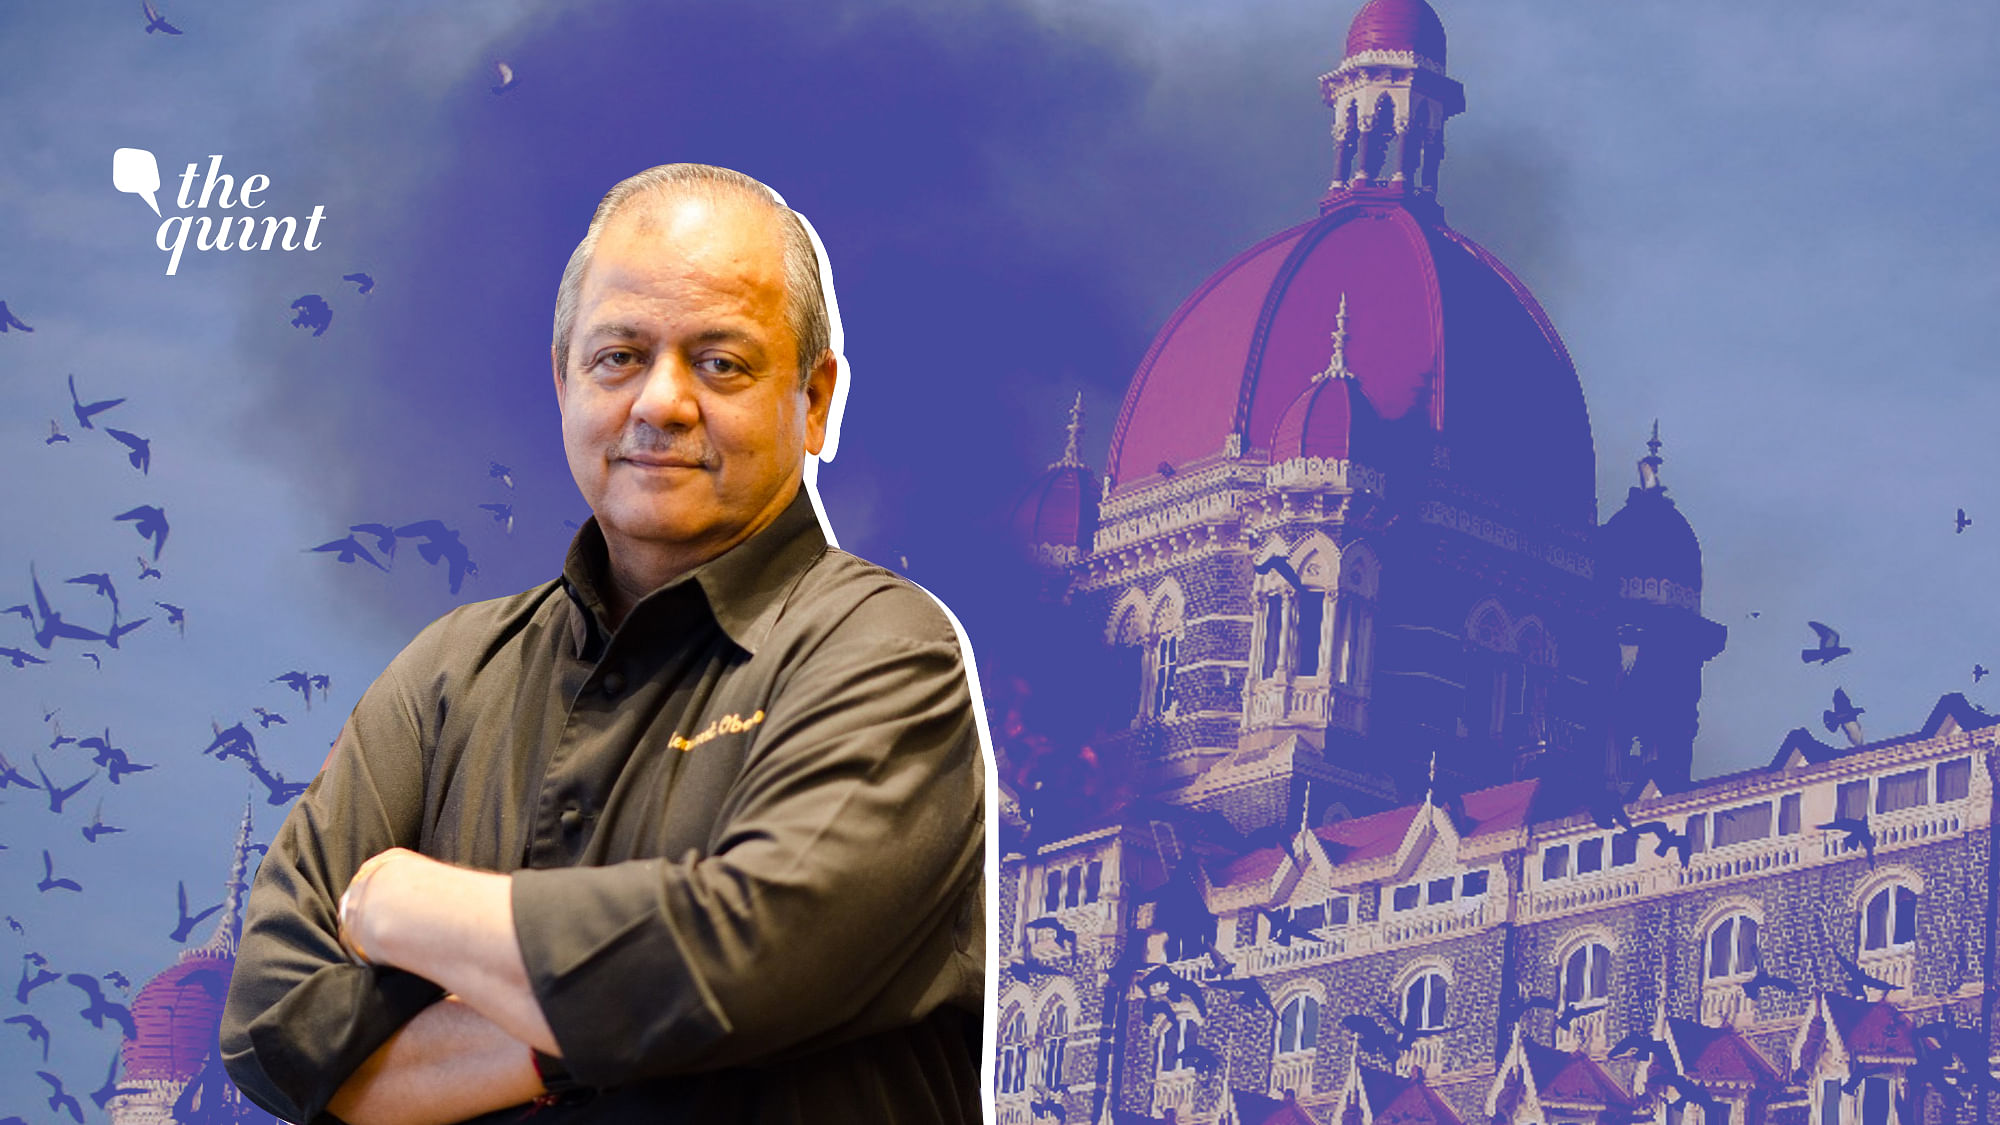 Chef Hemant Oberoi was the grand executive chef at the Taj Palace when 26/11 happened.